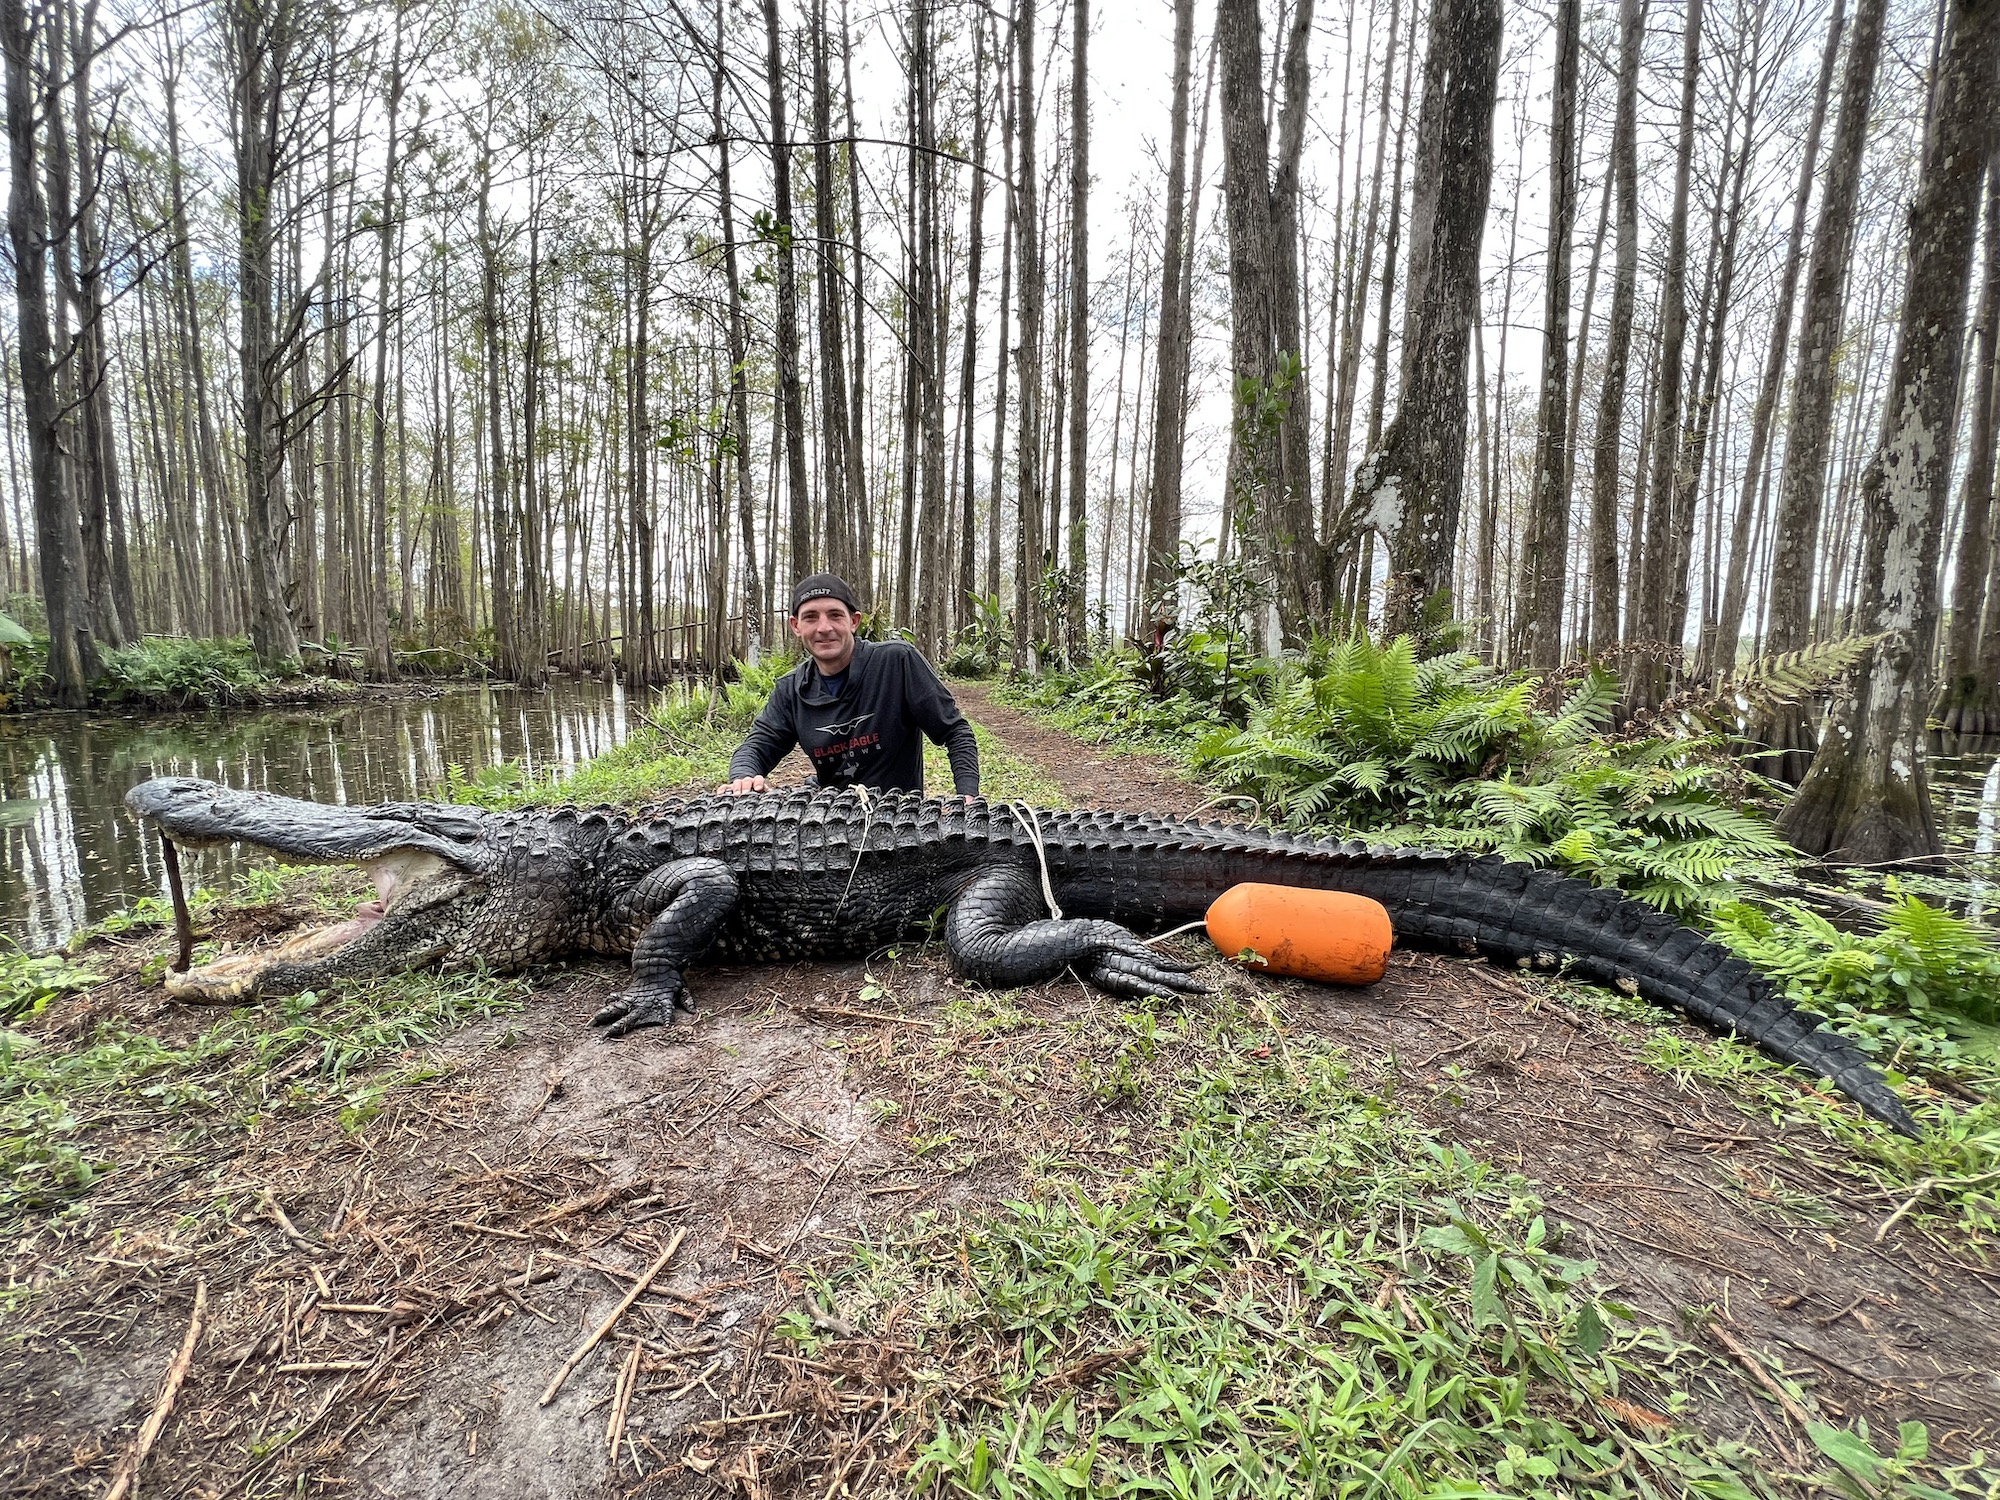 Hunter Tags Alligator Twice His Size in South Florida